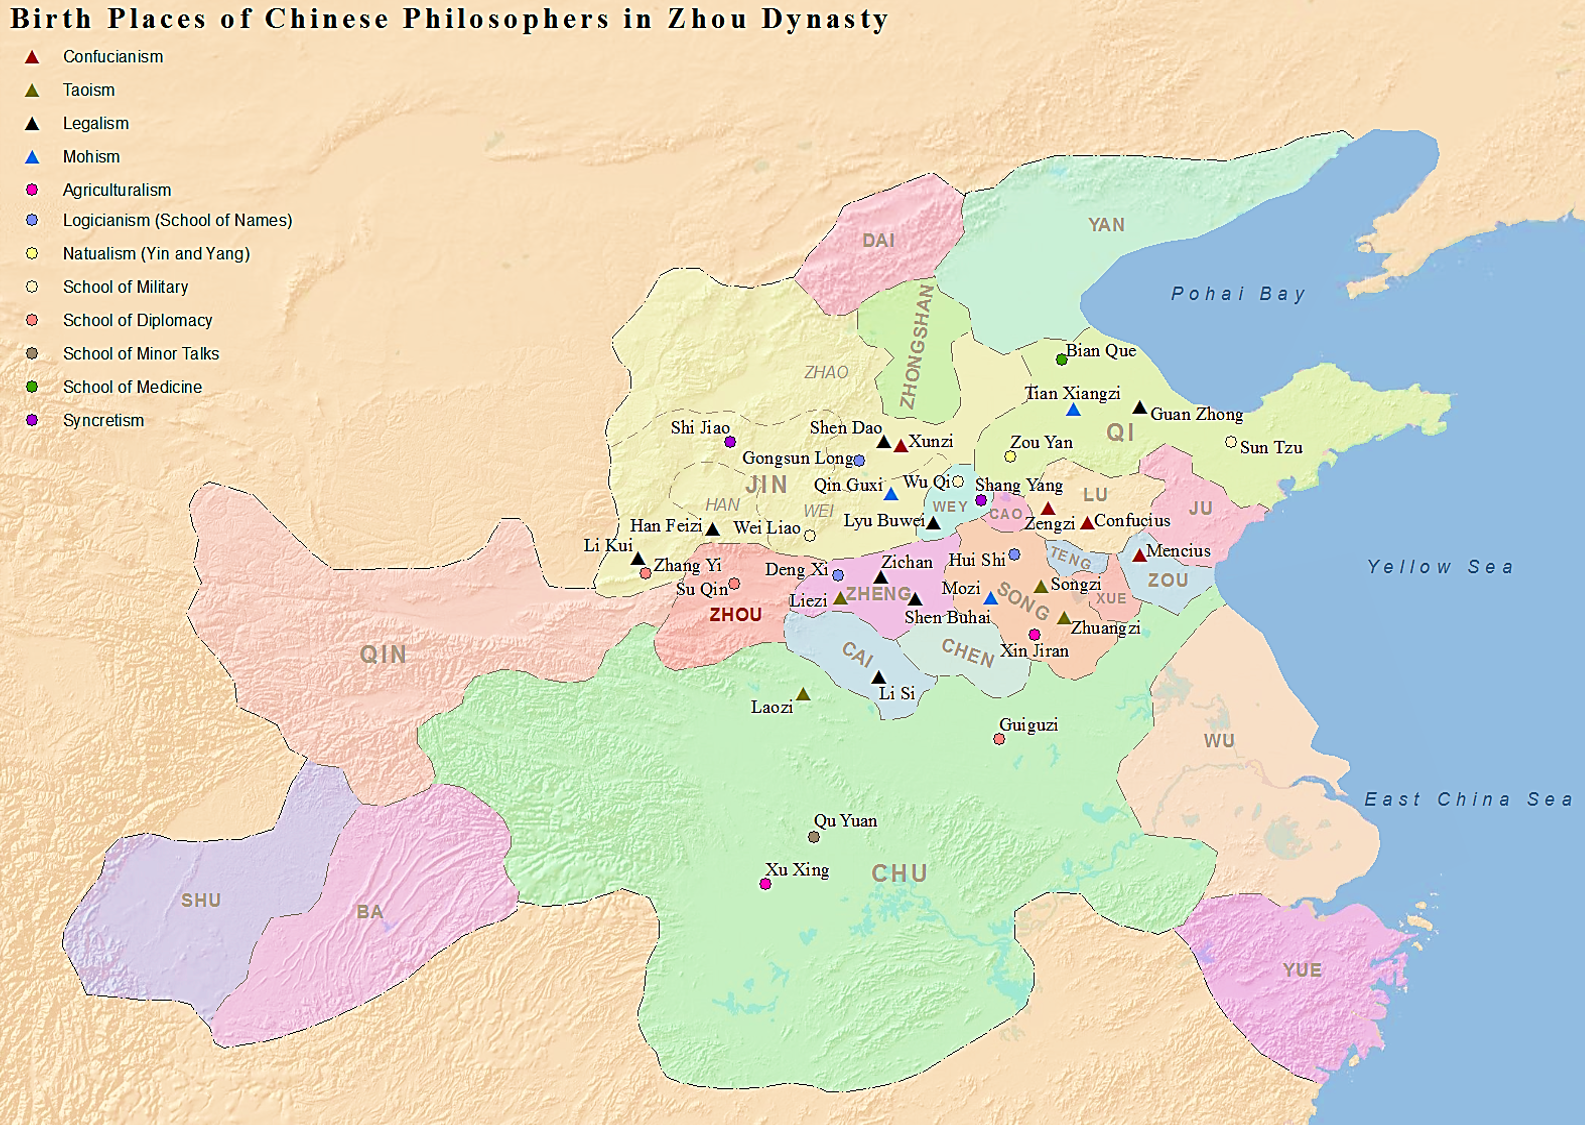 how did legalism impact china